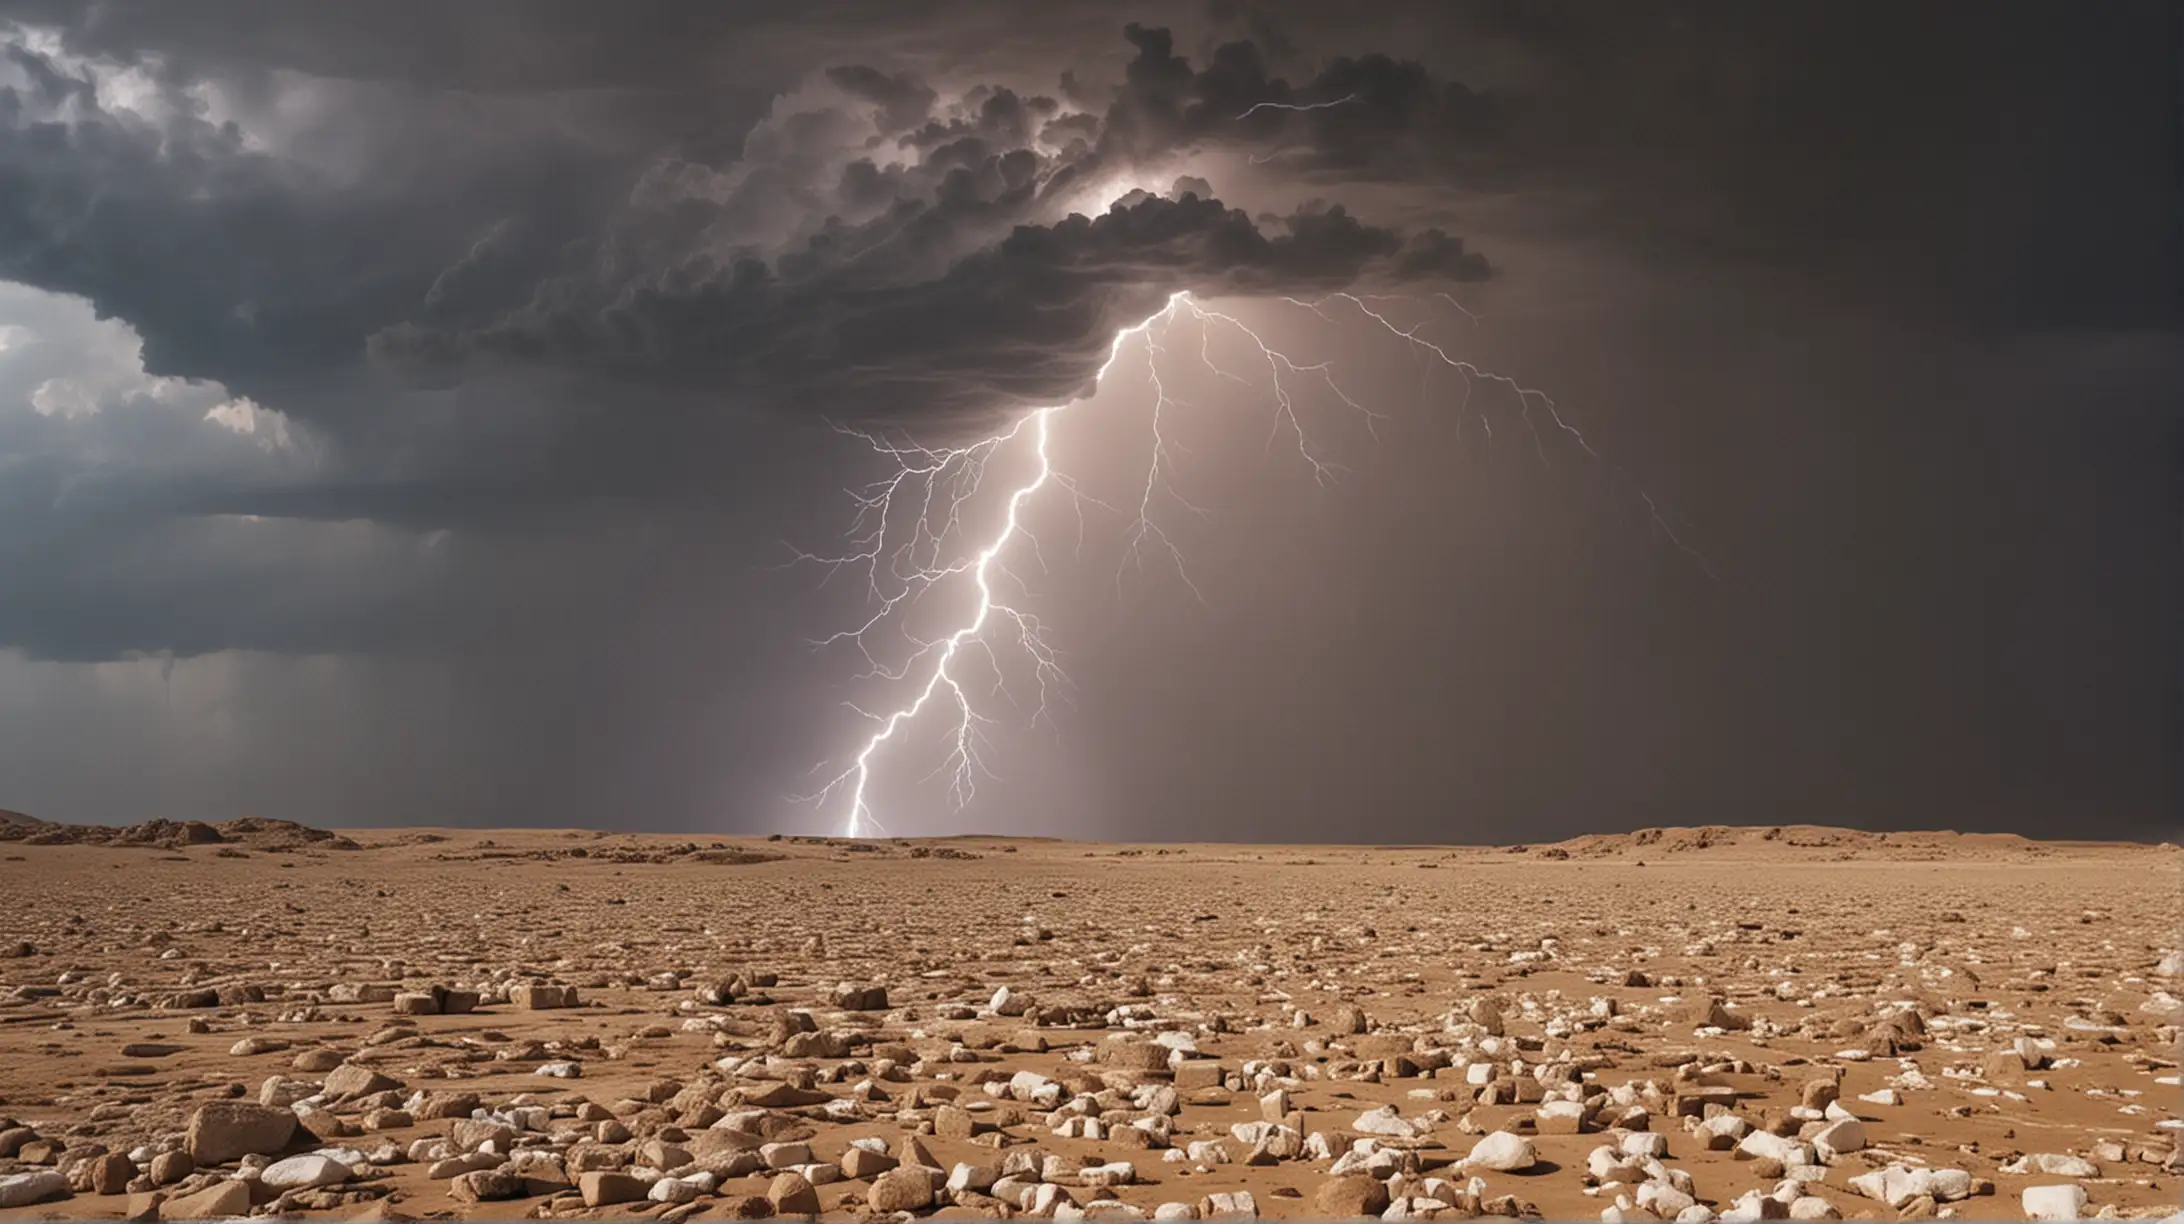 A scene where heavy hail with thunder and lightning hail is pouring down on  the deserts of Egypt, during the era of the Biblical Moses.